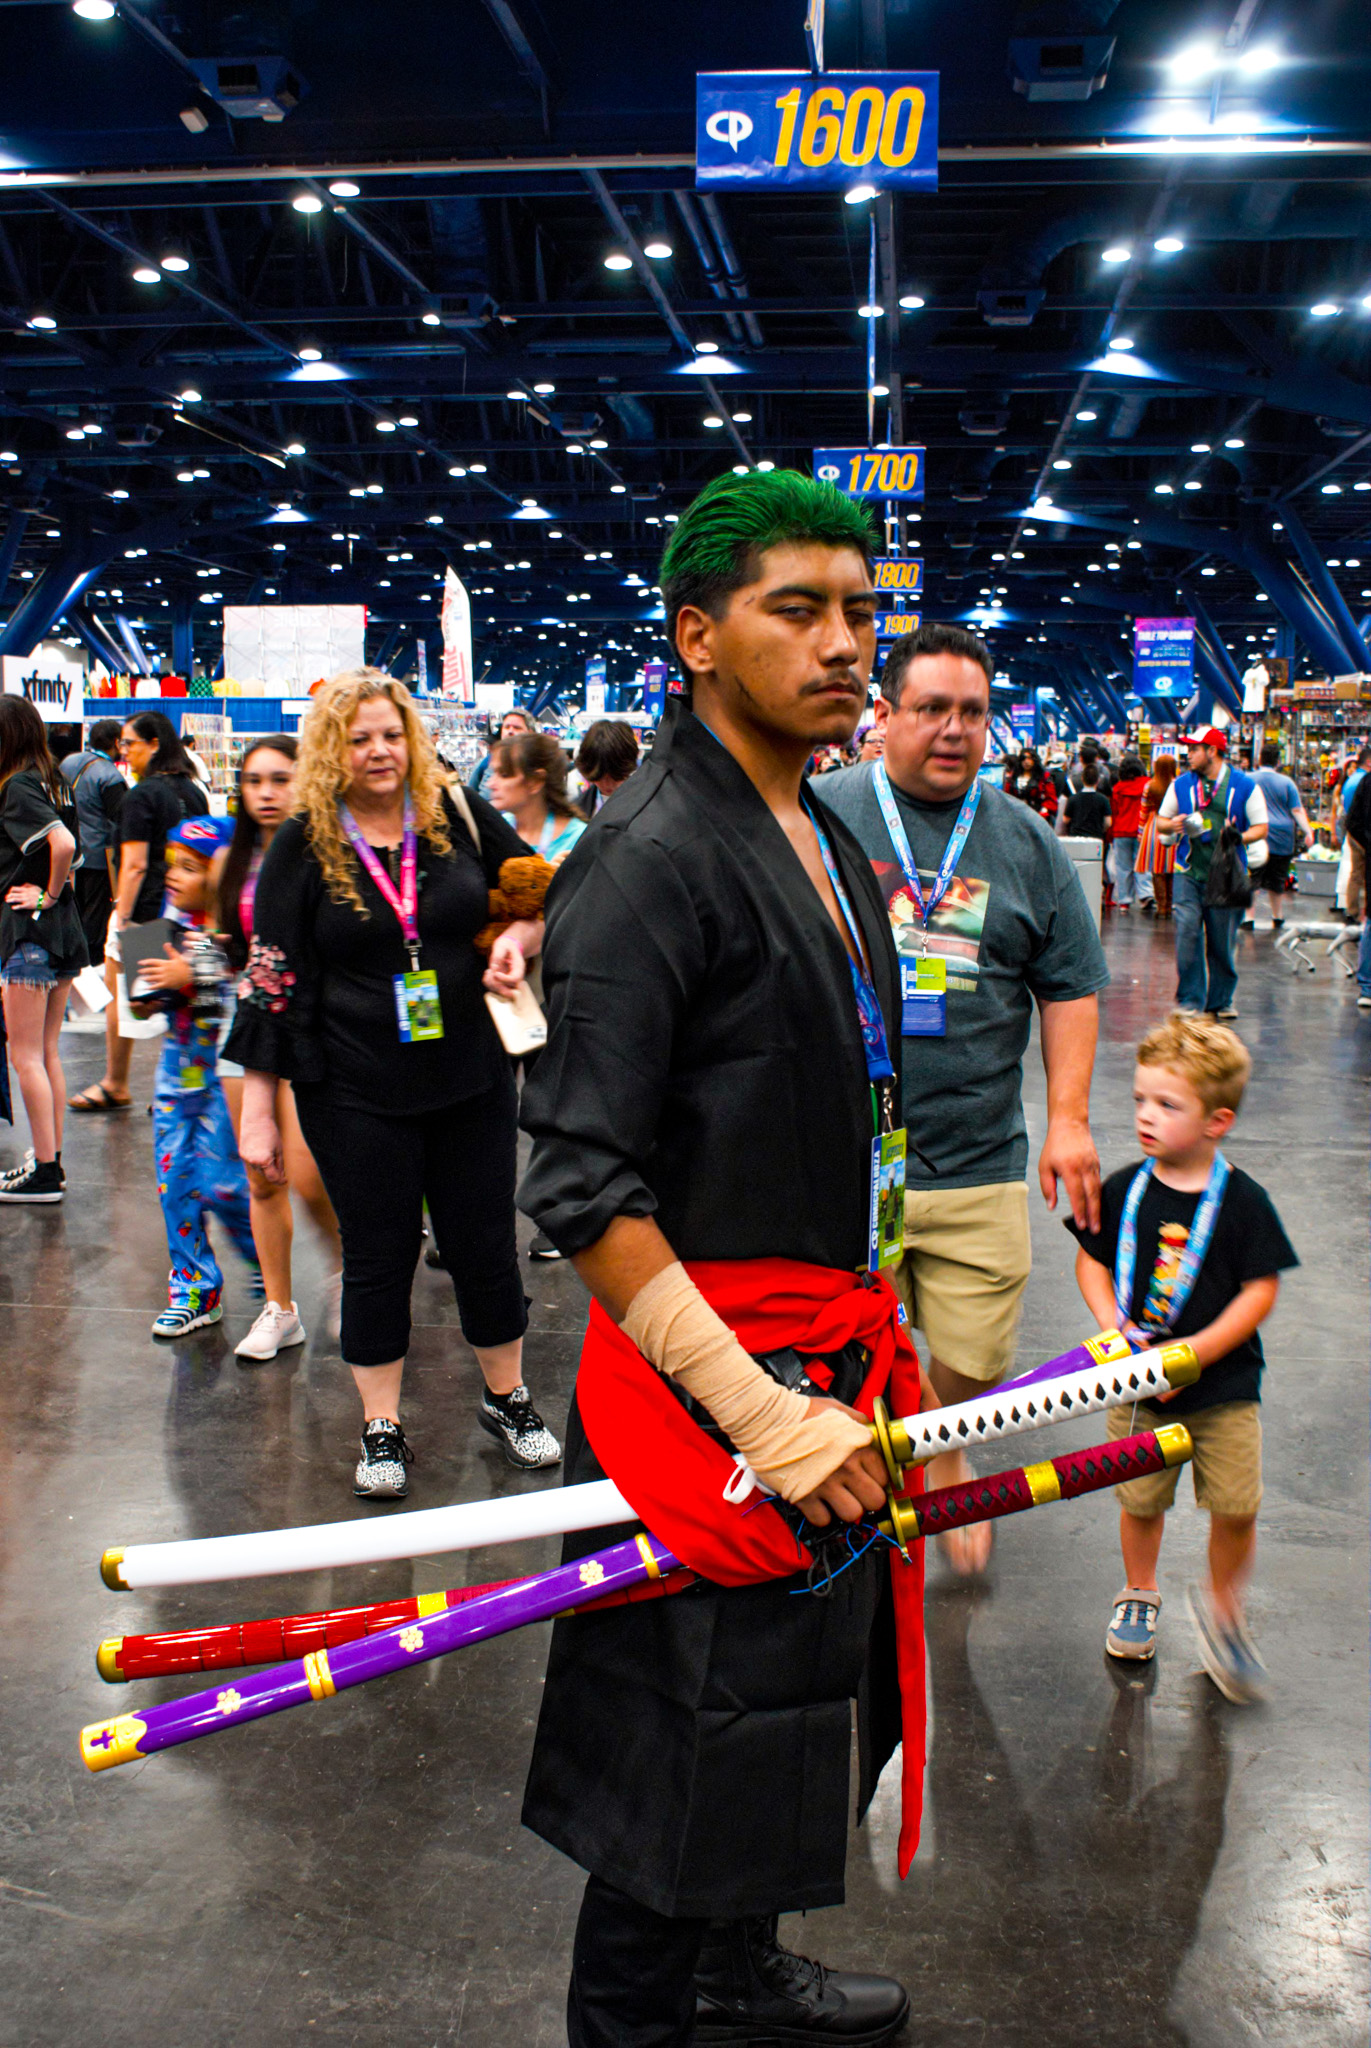 Leo is cosplaying as Zoro the pirate hunting swordsman of the Straw Hat Crew from the series One Piece. This was Leo's first year here at Comicpalooza, Leo already had most of the parts of the cosplay with him, so this did not take long to put together. Photo by reporter Adan Martienz.